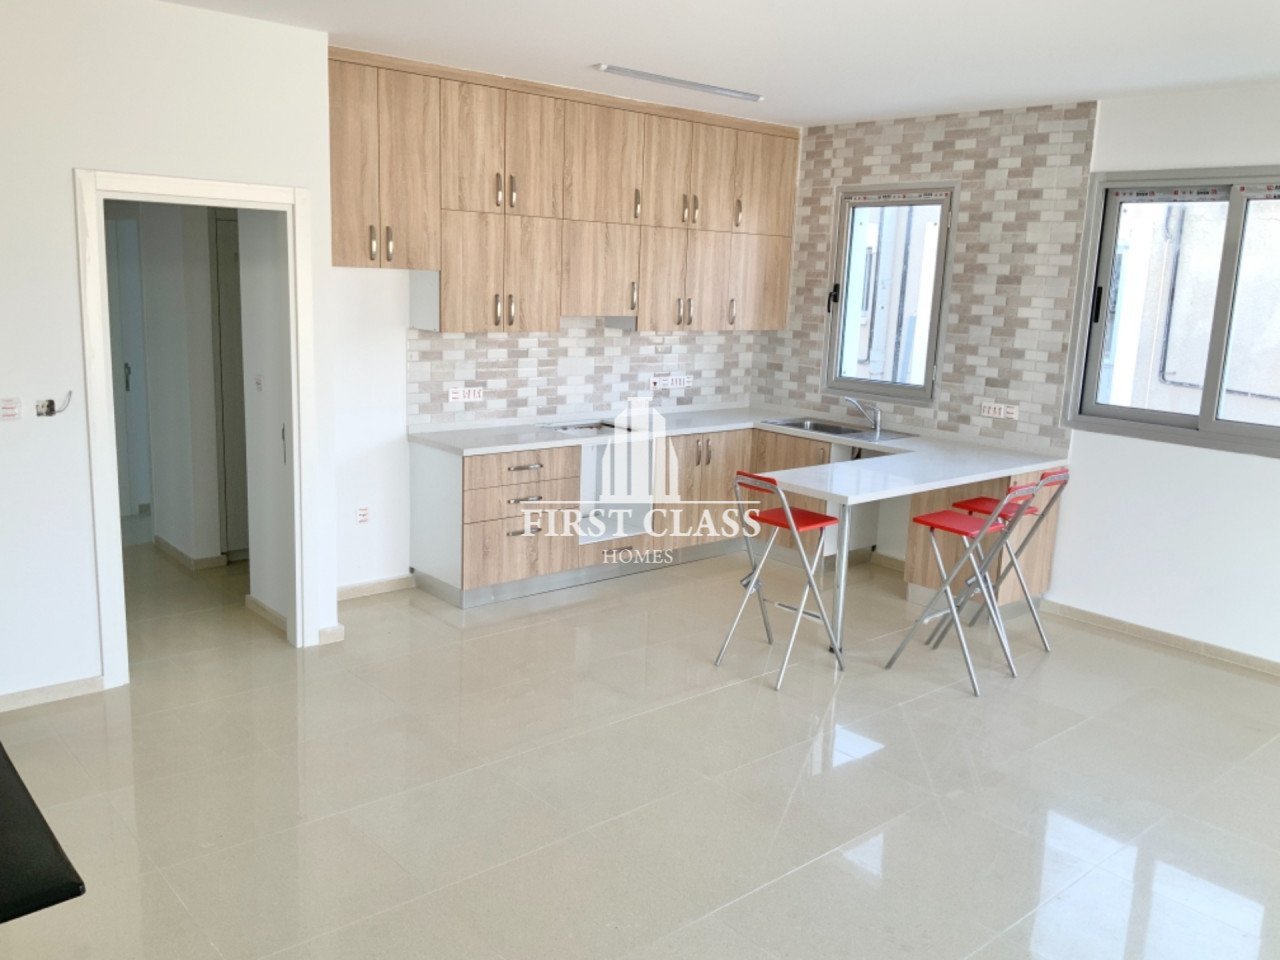 Property for Rent: Apartment (Flat) in Anthoupoli, Nicosia for Rent | Key Realtor Cyprus